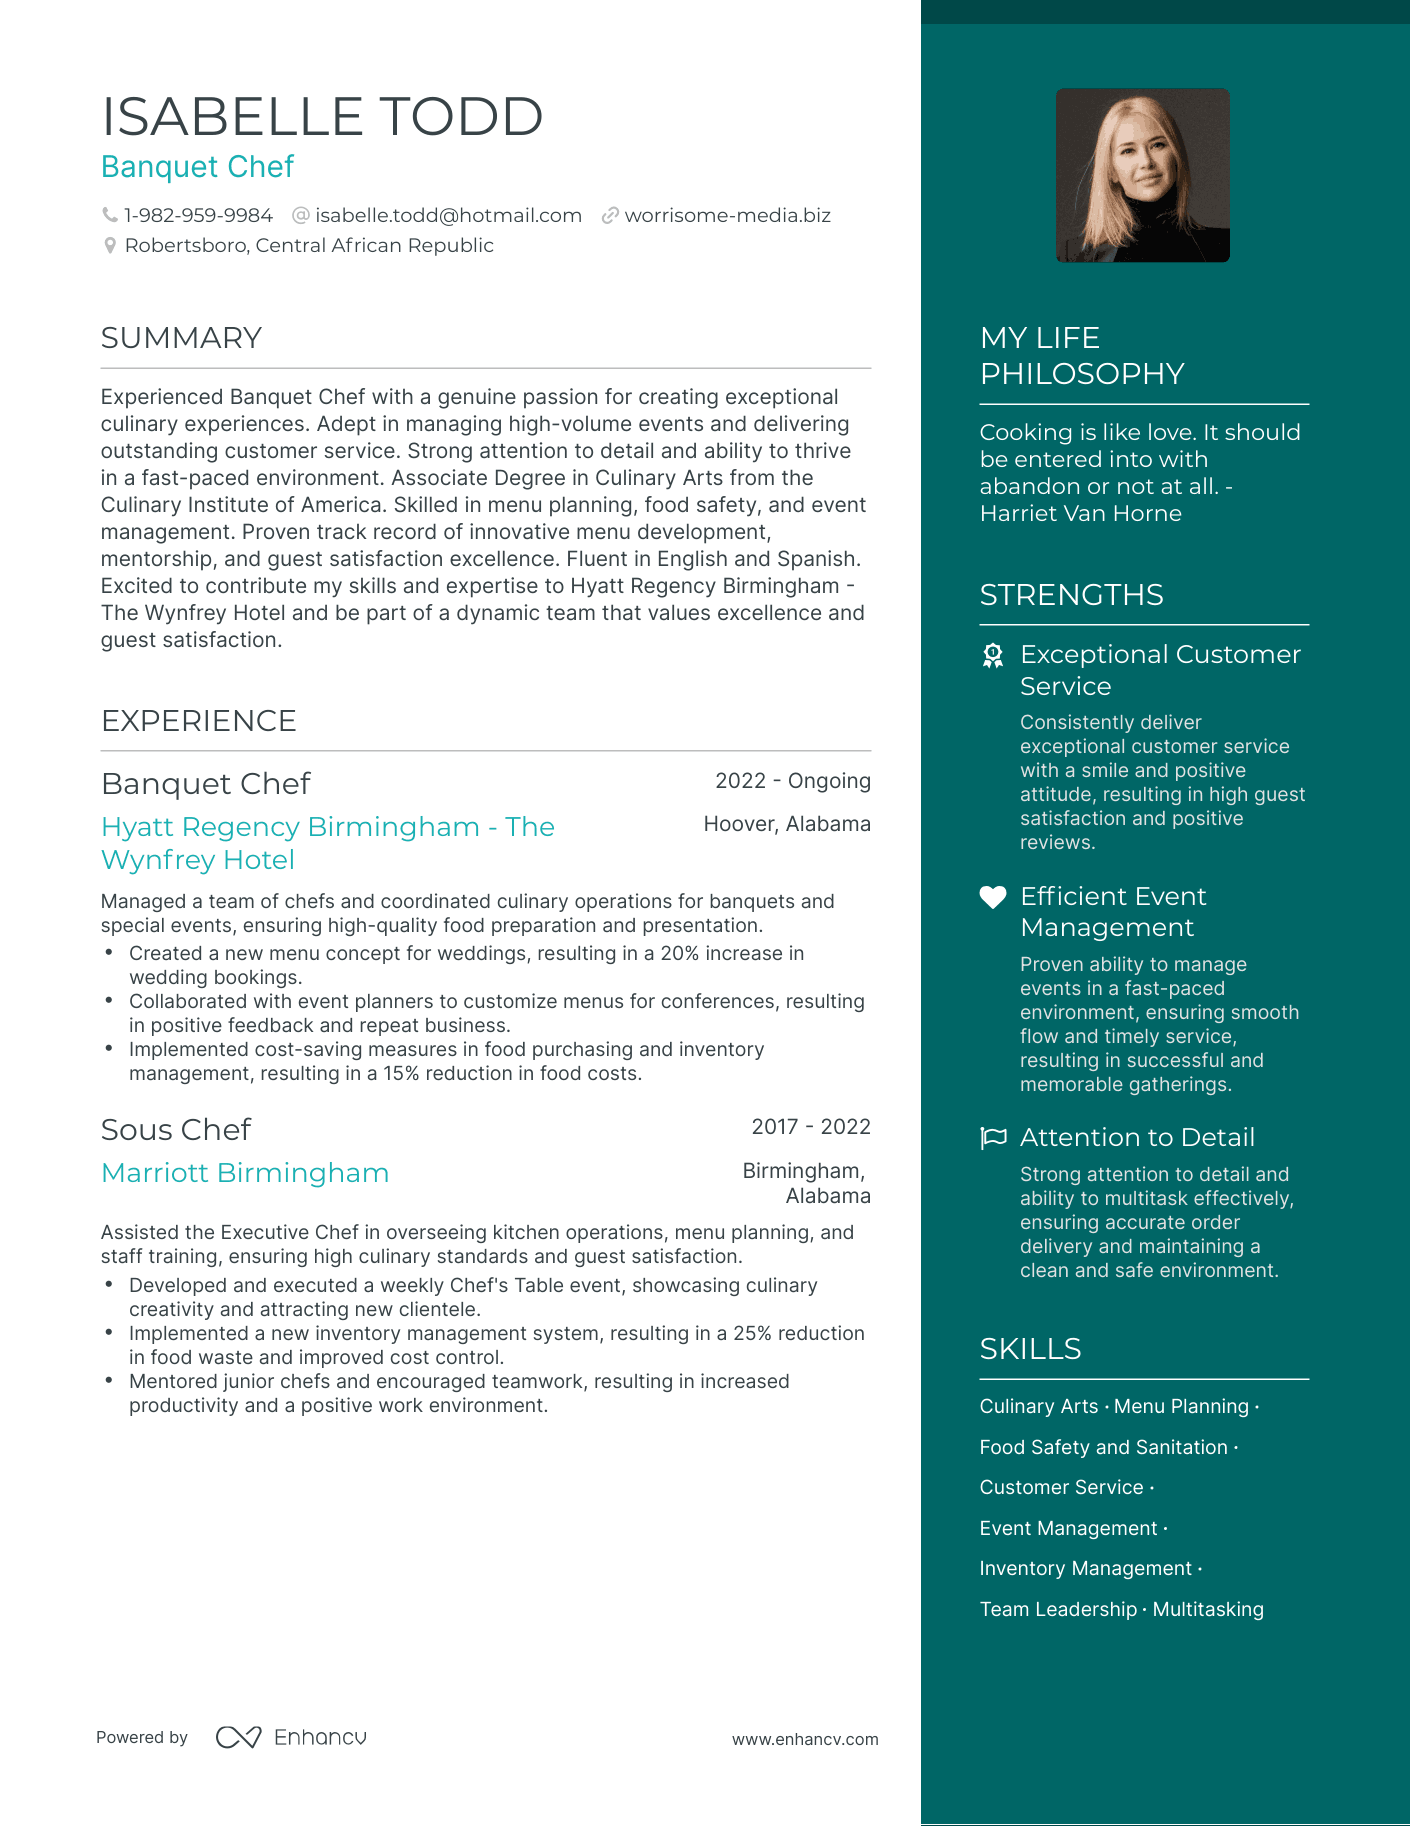 Banquet Chef resume example